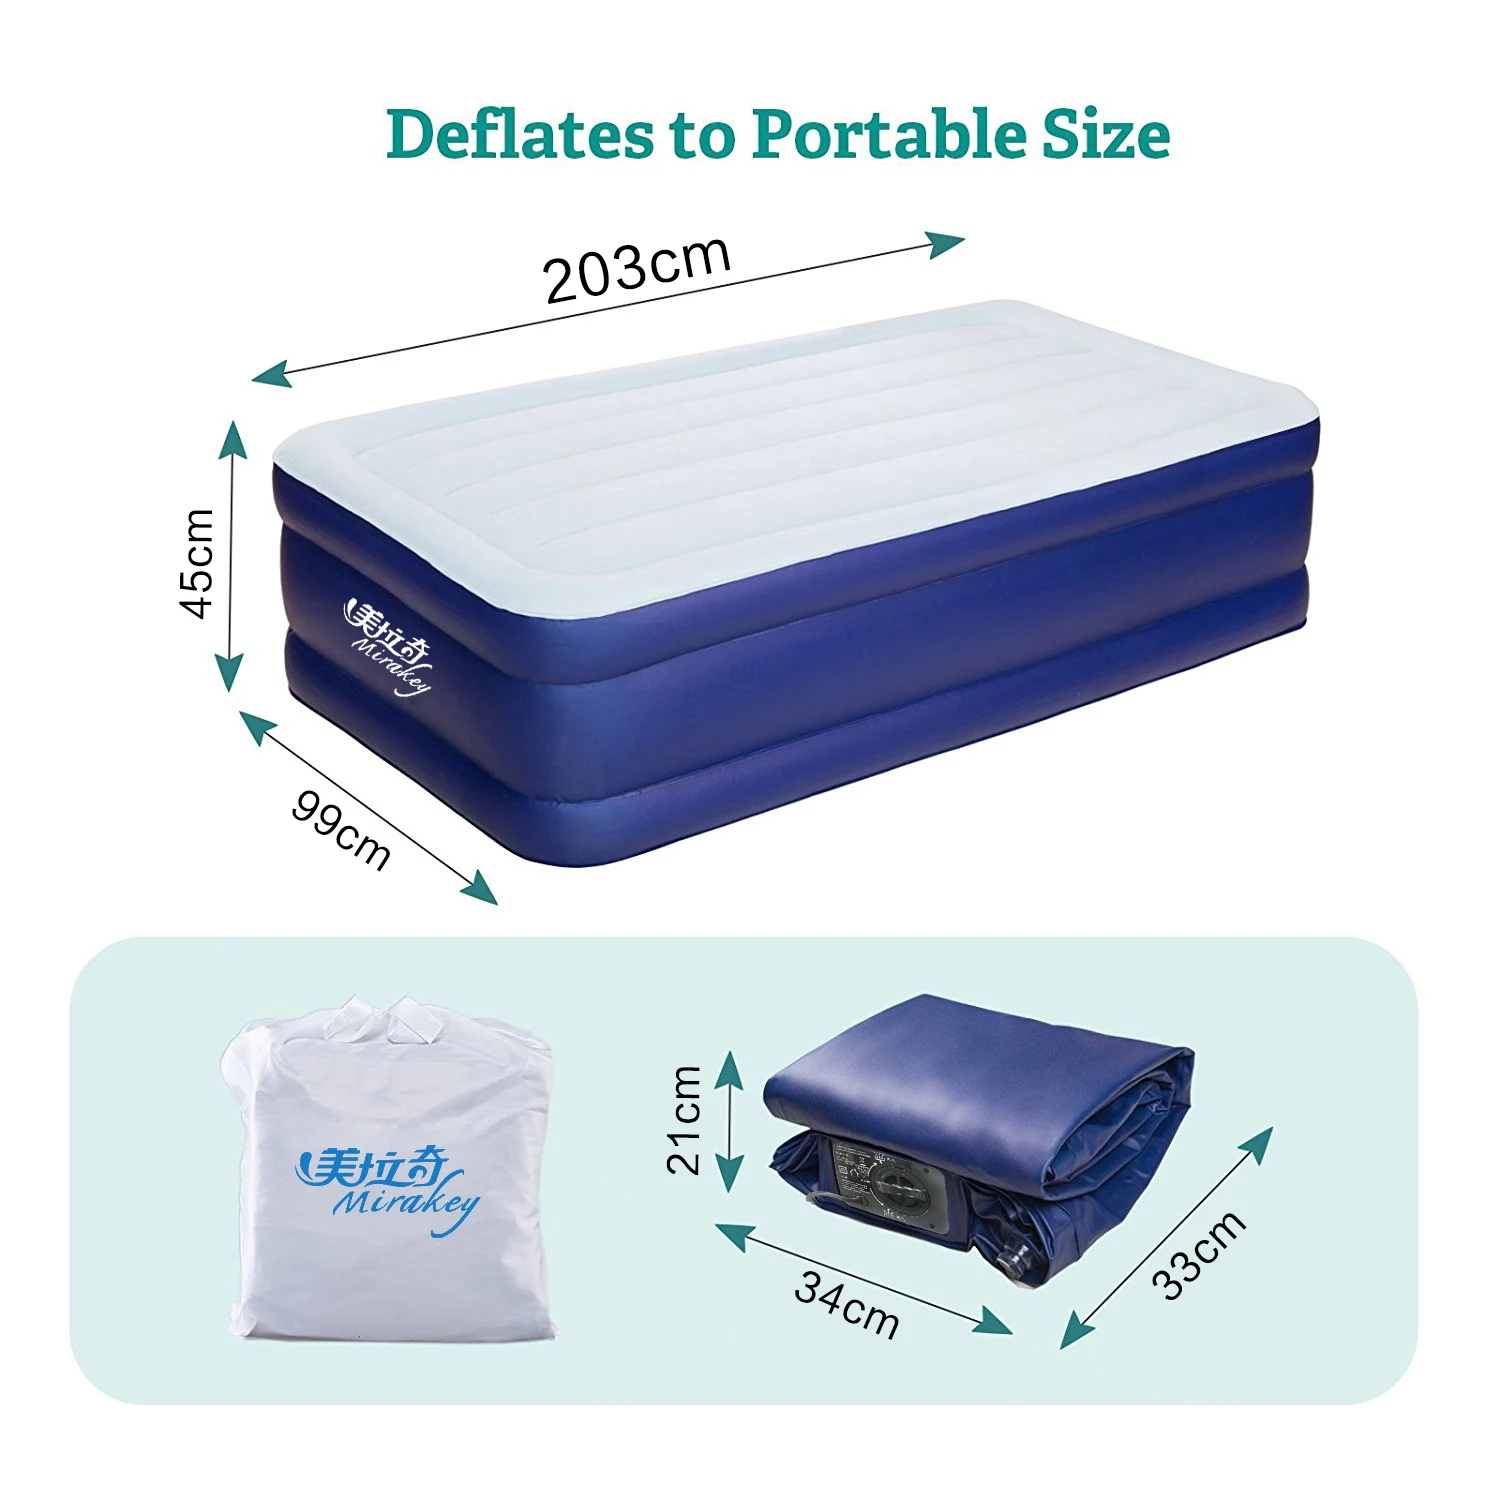 Mirakey airbed Raised queen size custom air bed custom inflatable mattress with electric pump